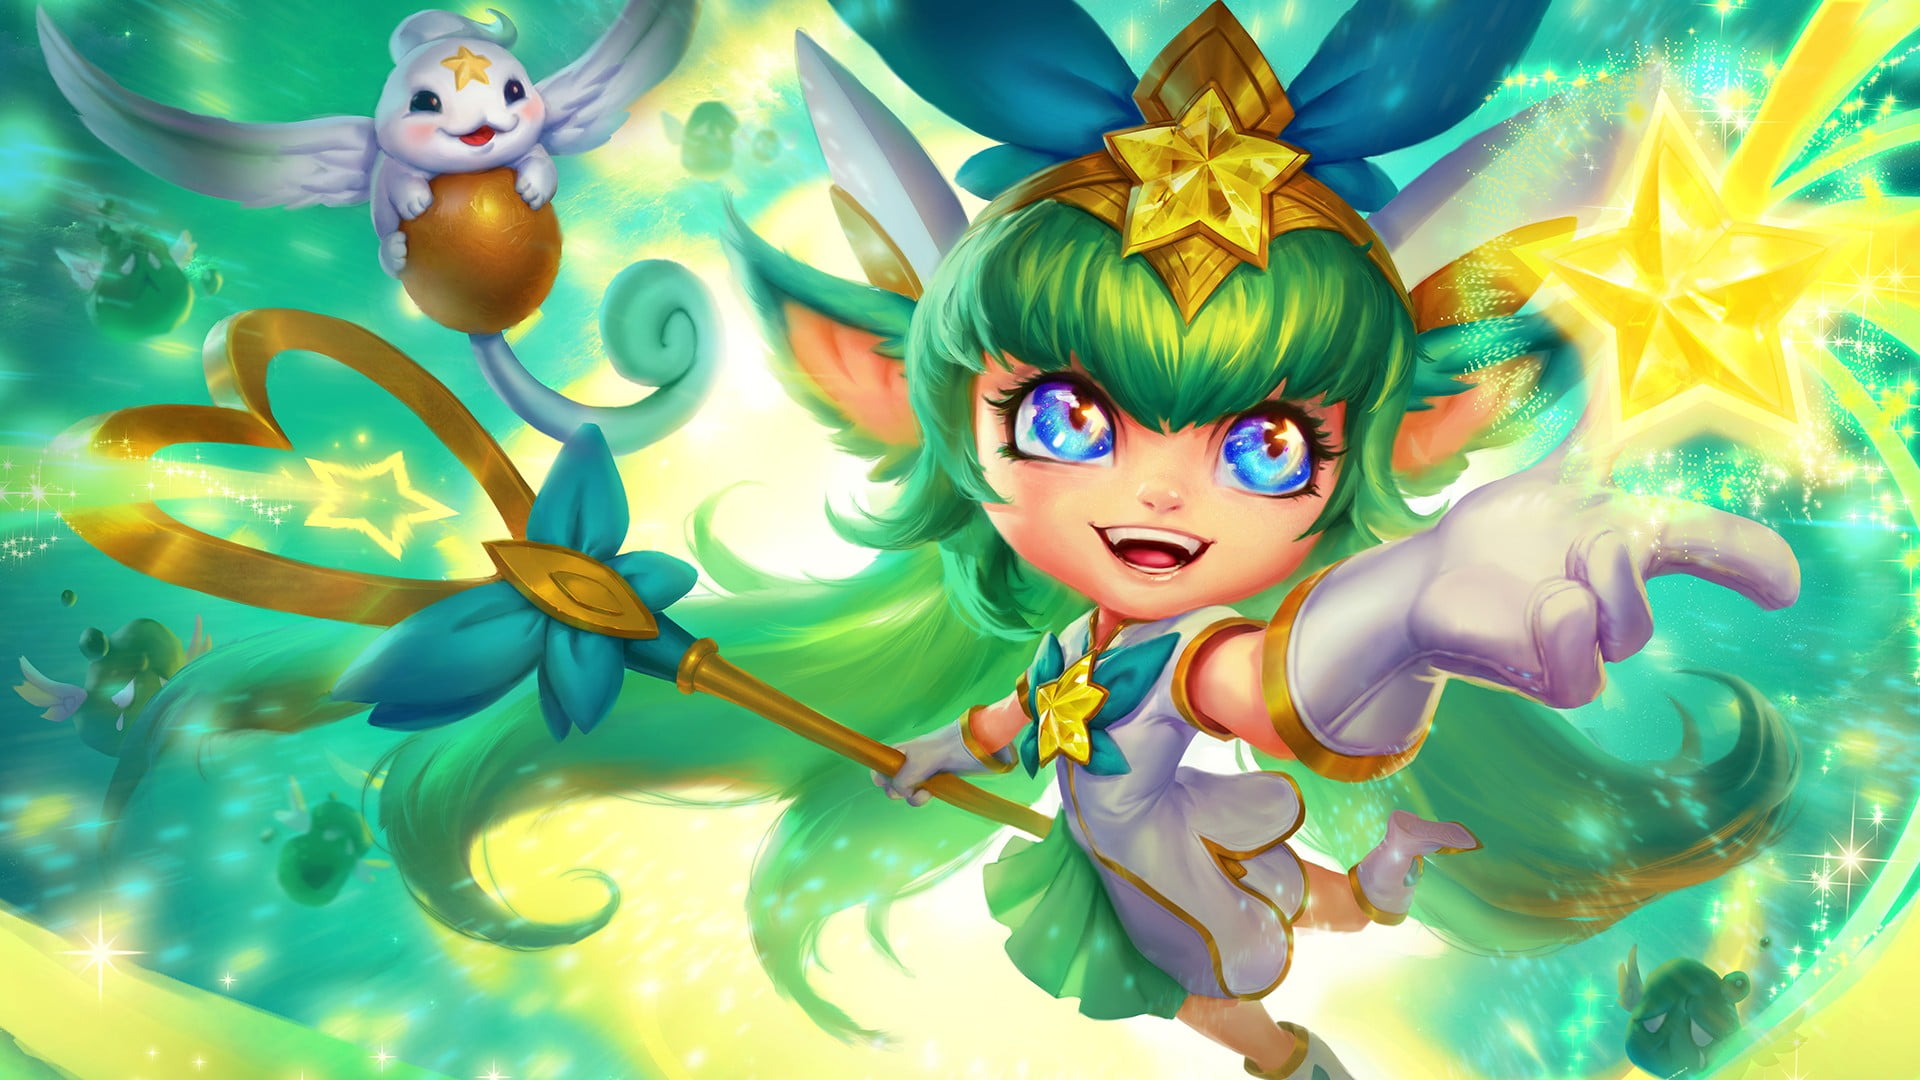 white and green anime character wallpaper, Summoner's Rift, Lulu (League of Legends), Star Guardian